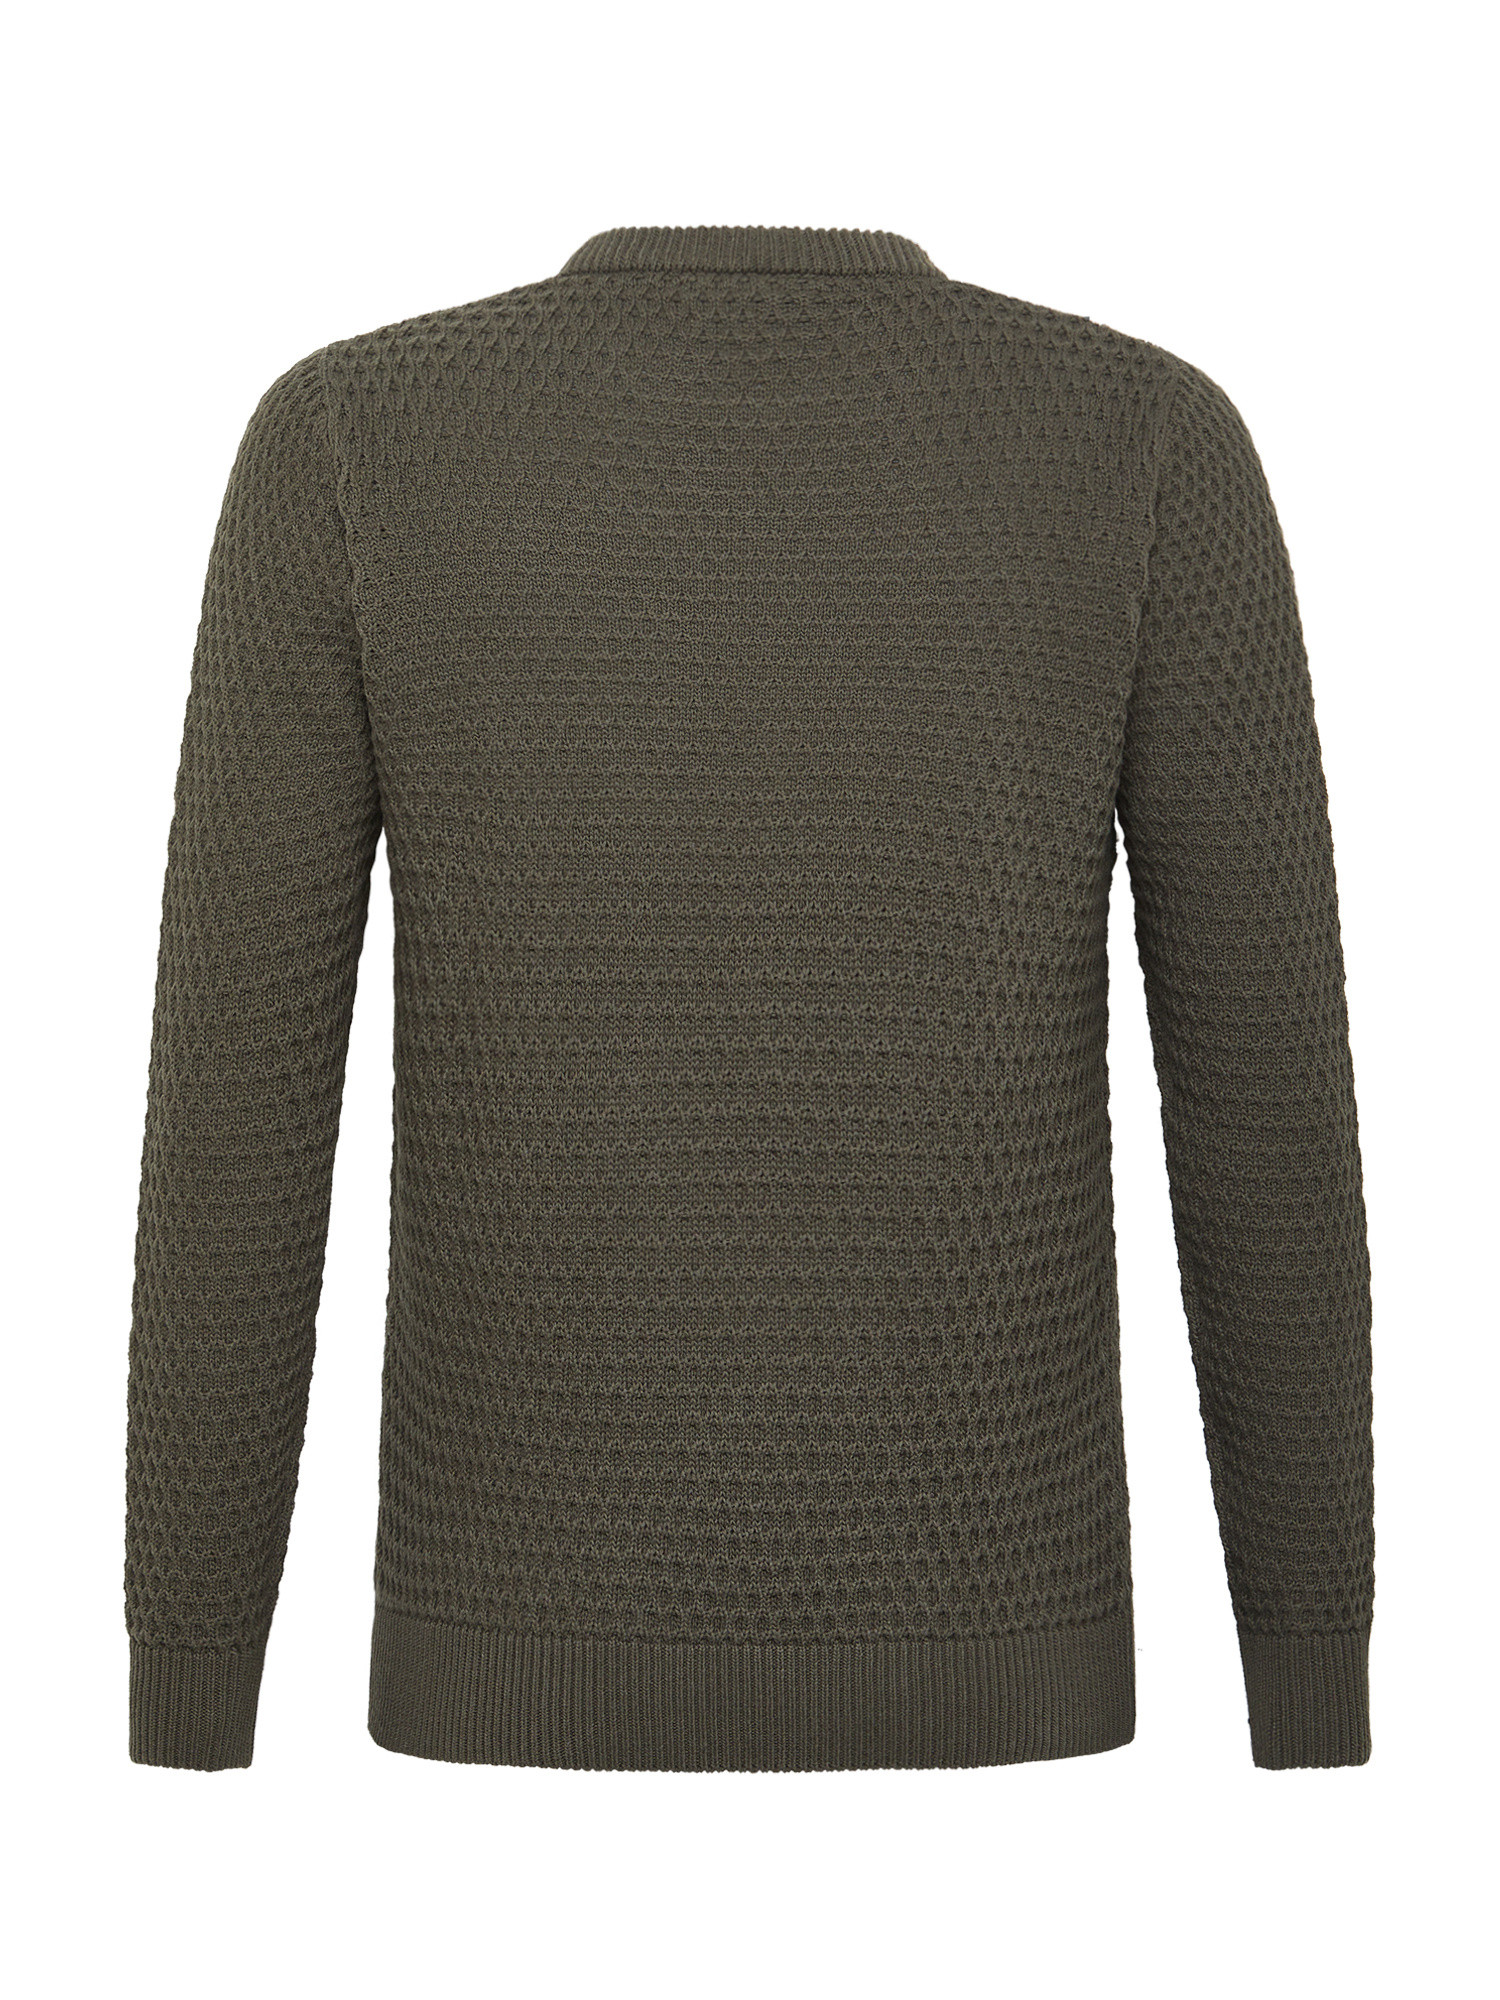 Luca D'Altieri - Eco-friendly cotton crew neck sweater, Green, large image number 1